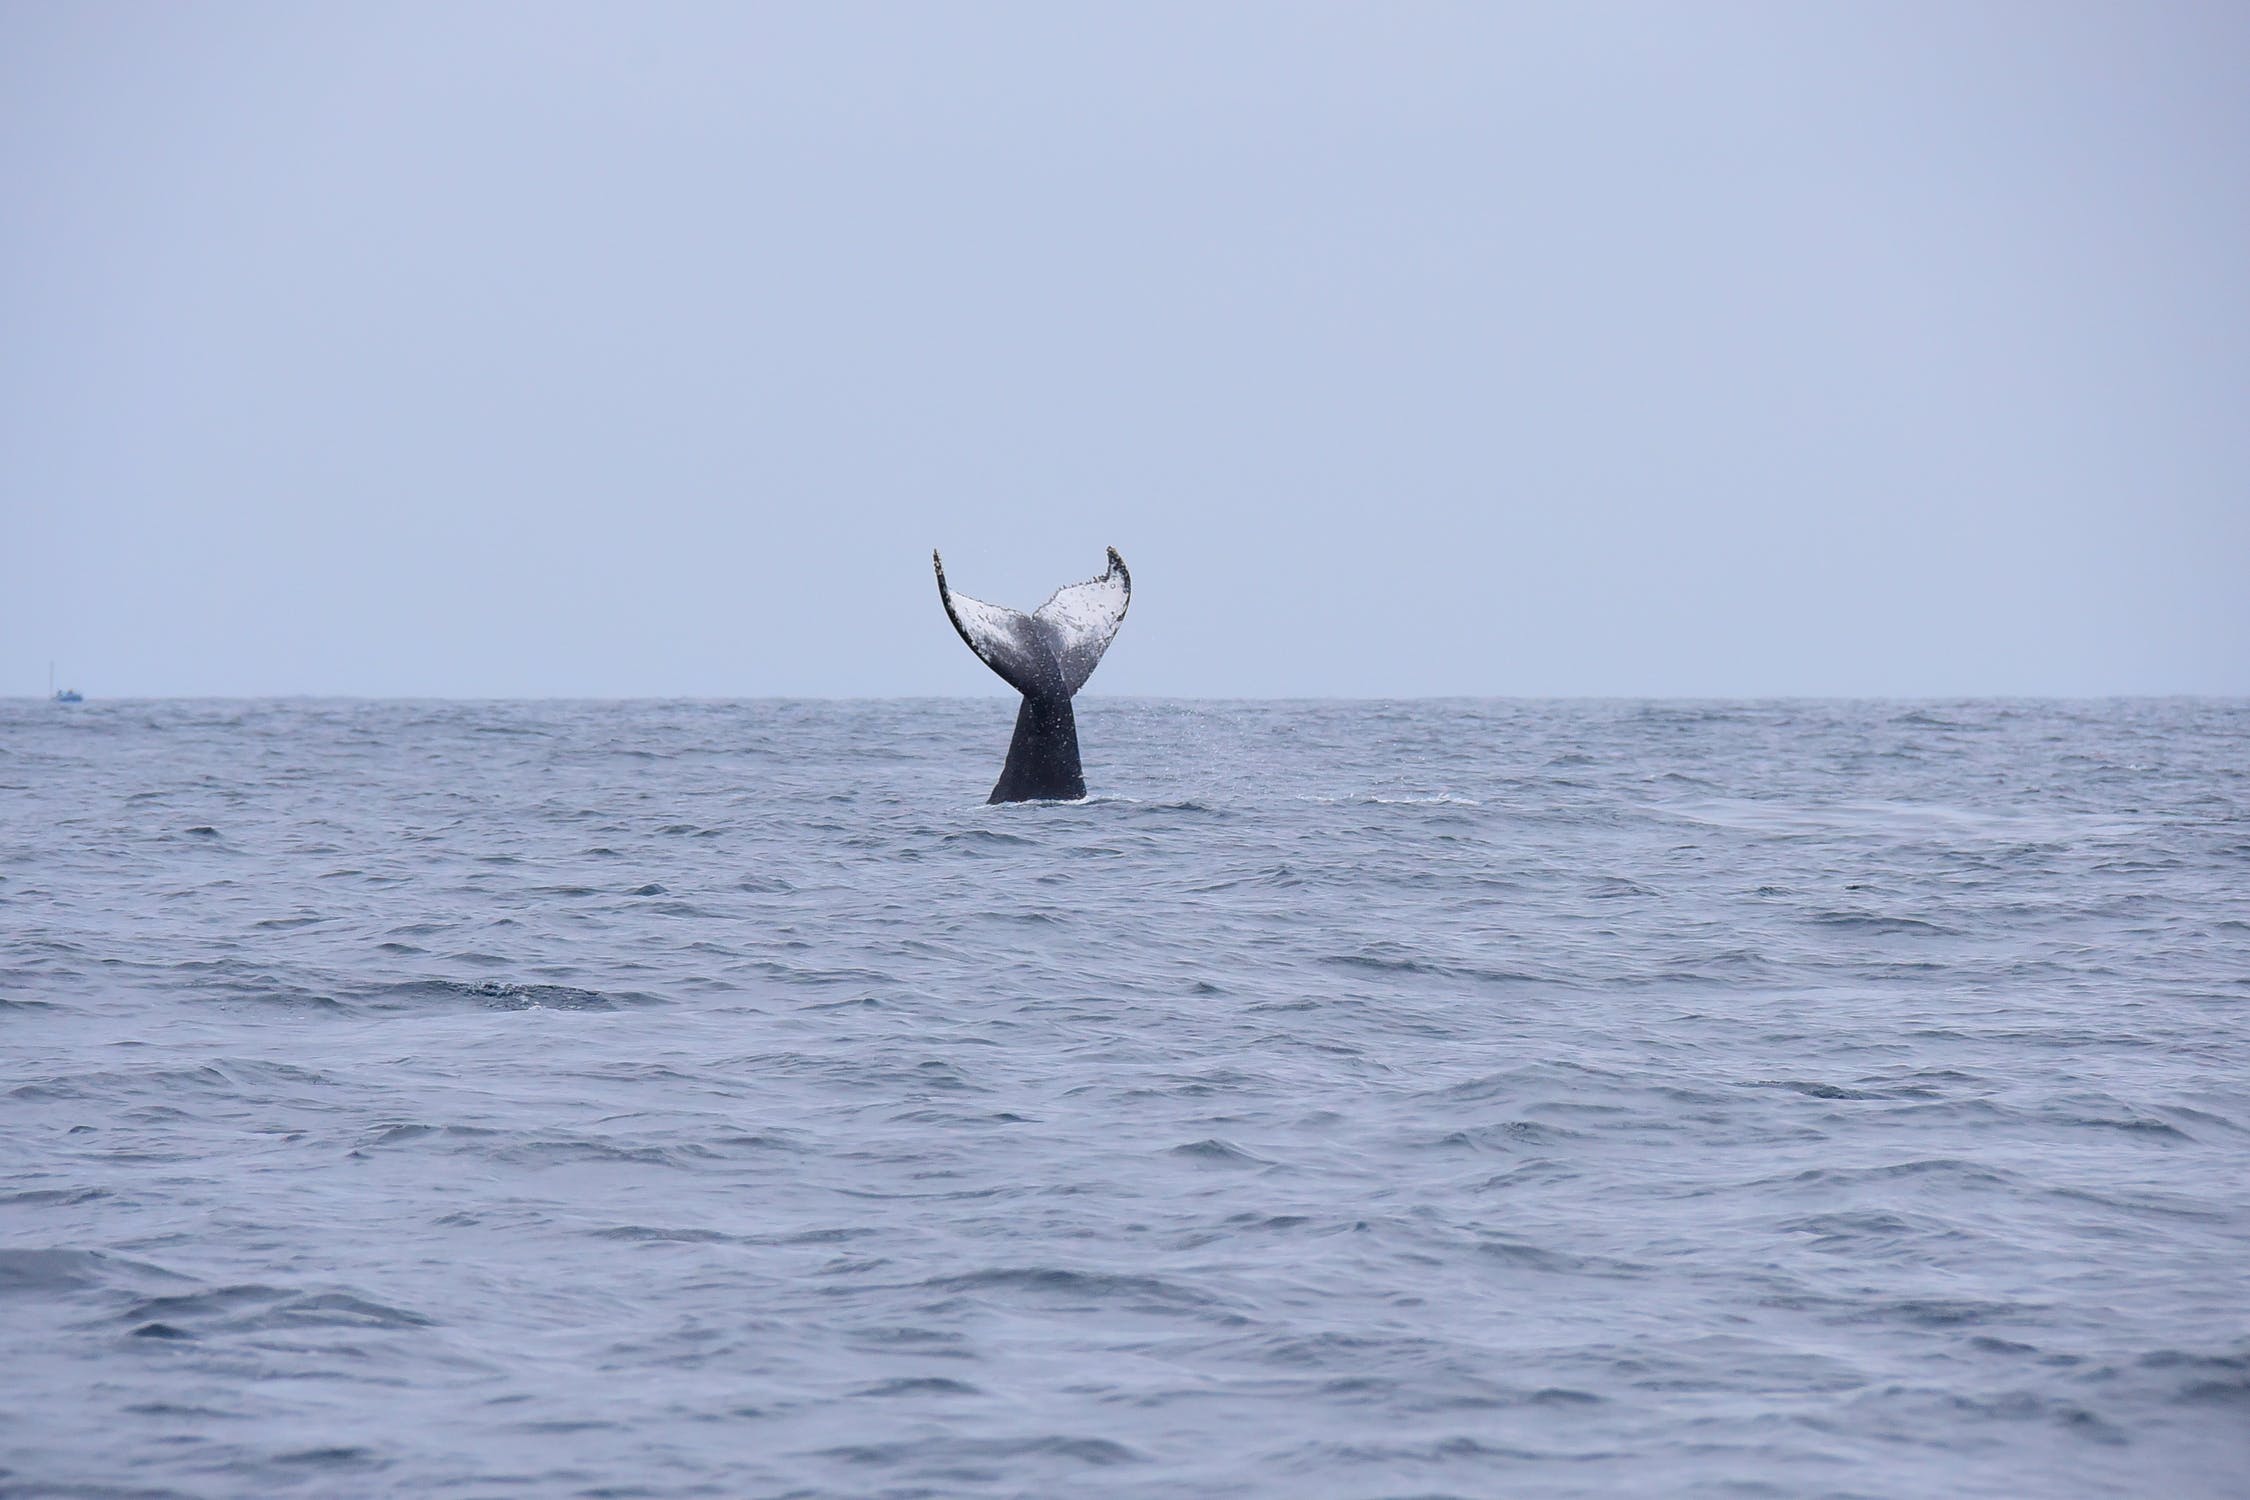 Whale Watching South African Experiences South Africa things to sightseeing